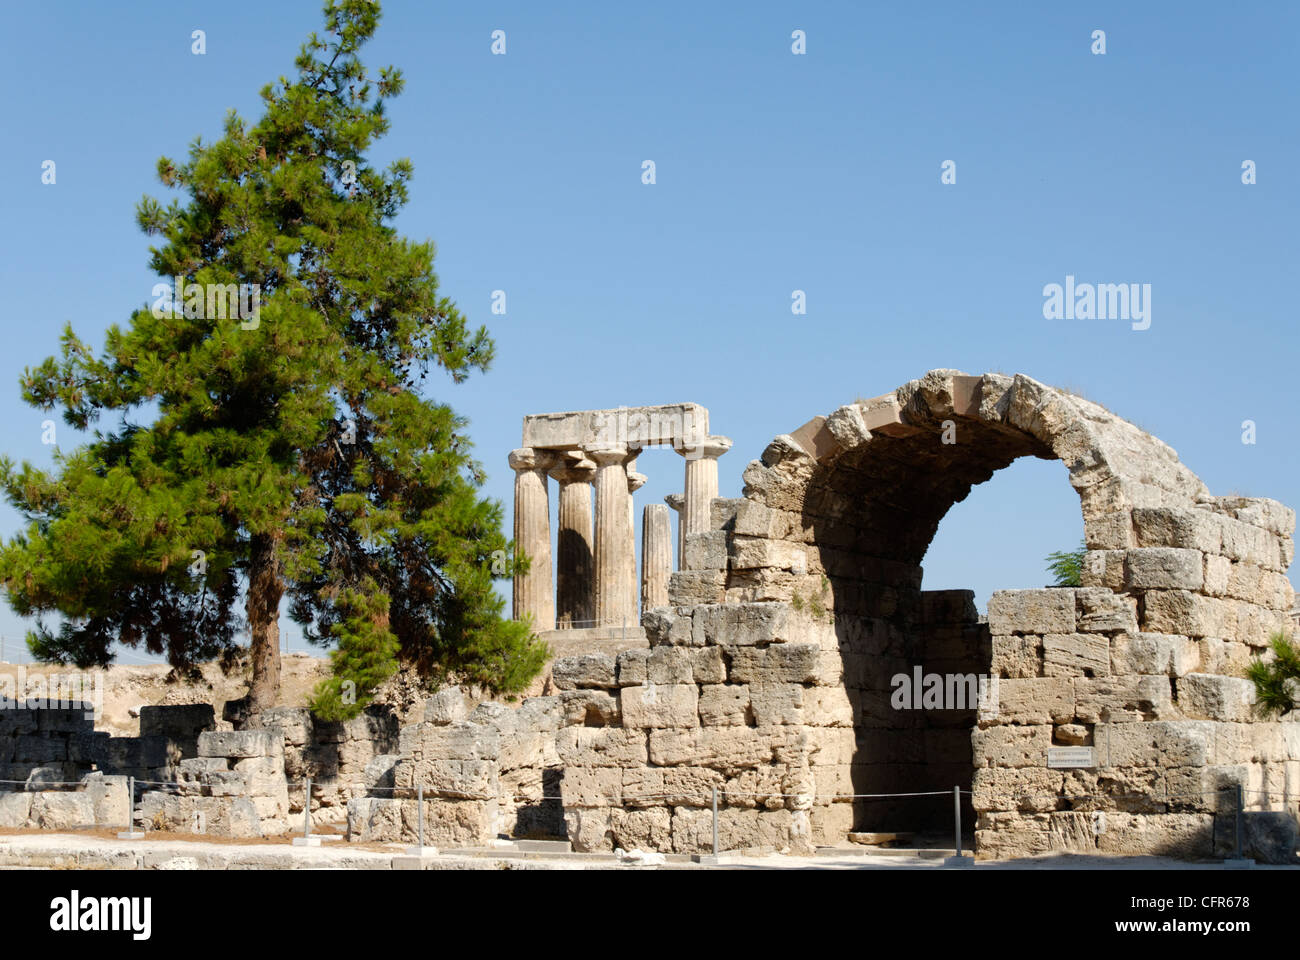 Ancient Corinth. Peloponnese. Greece. View of part of the northwest stoa of the Agora which was lined with shops and had large Stock Photo